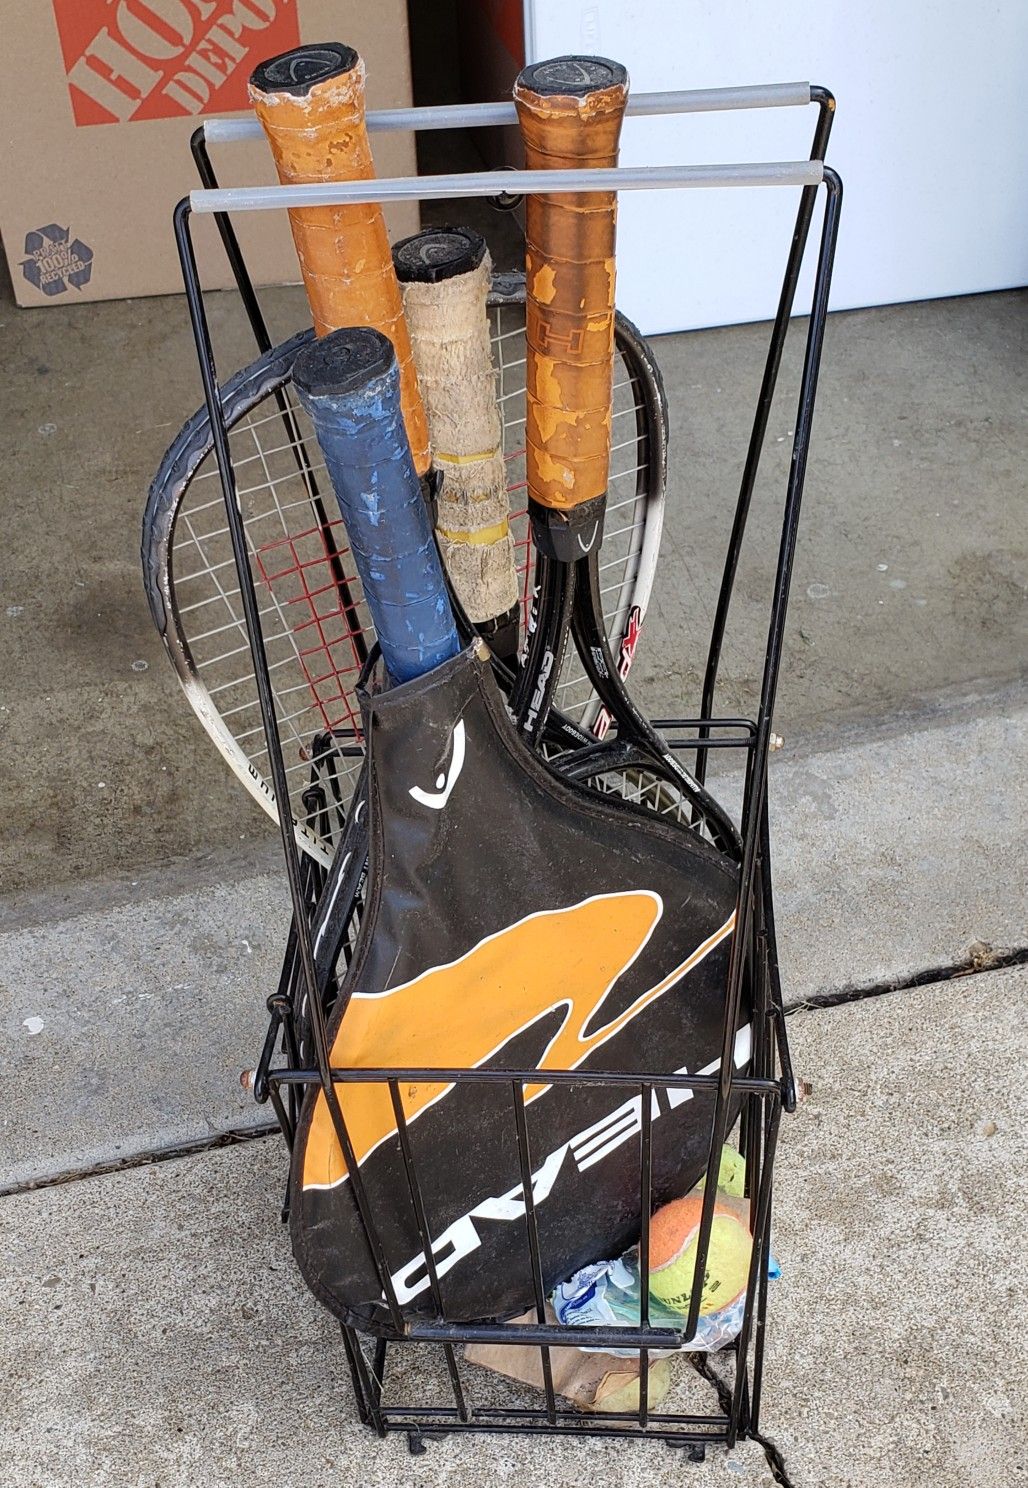 Tennis rackets and ball cage collector